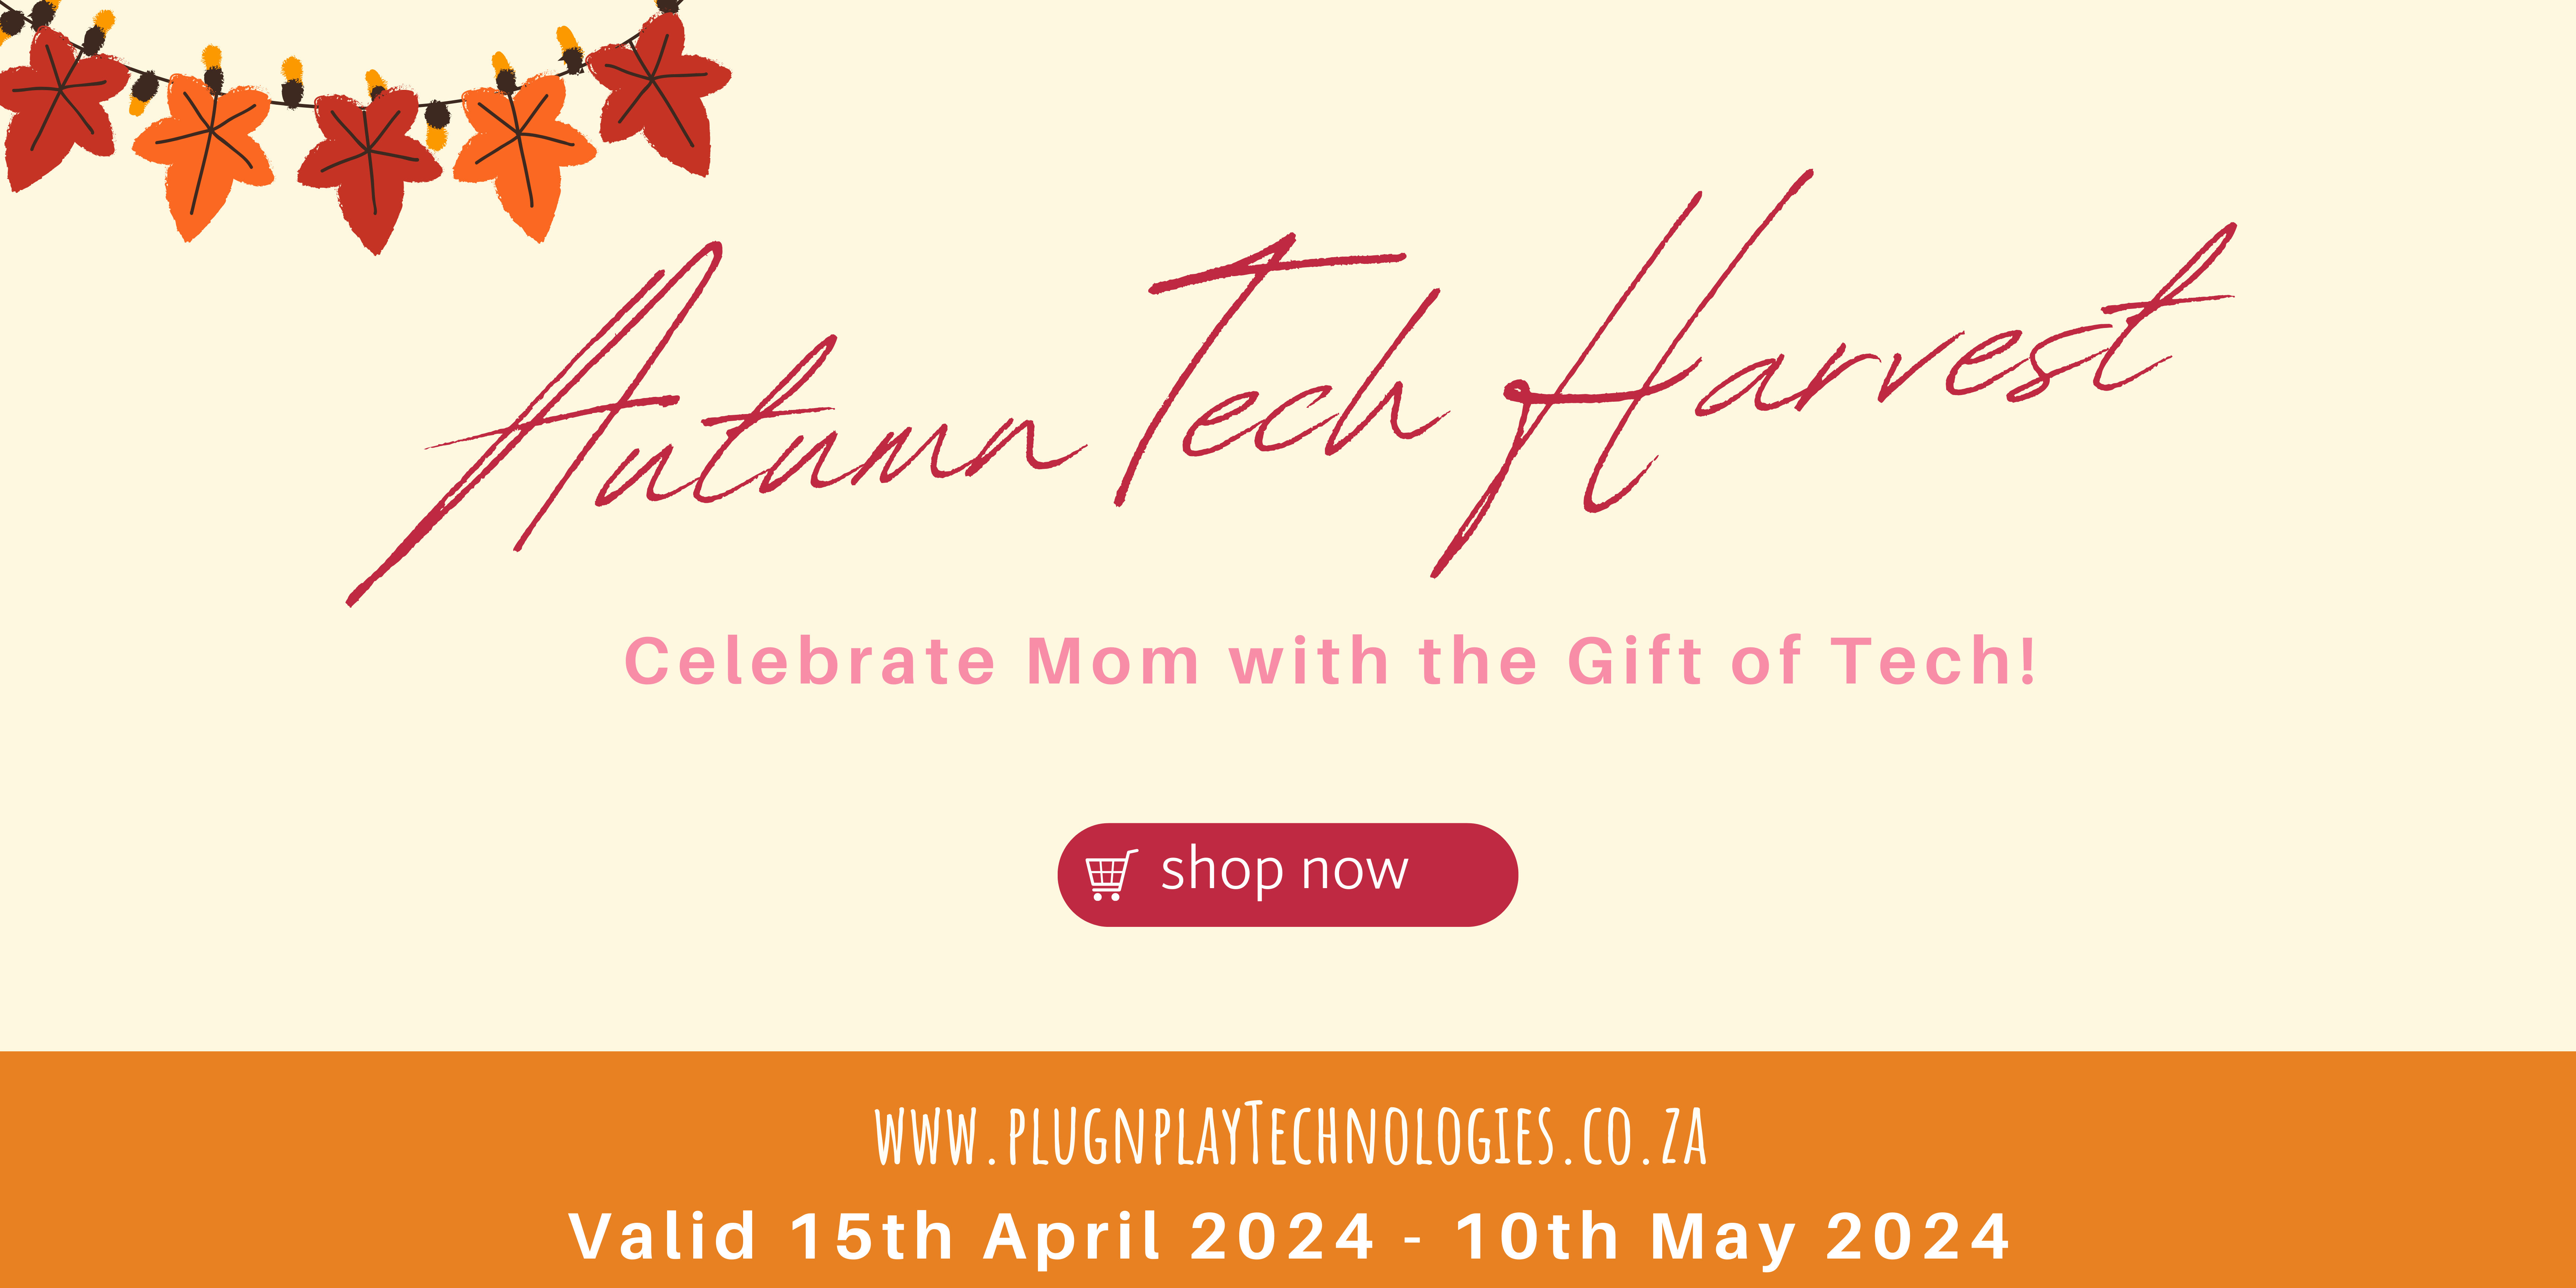 Celebrate mom with the gift of tech